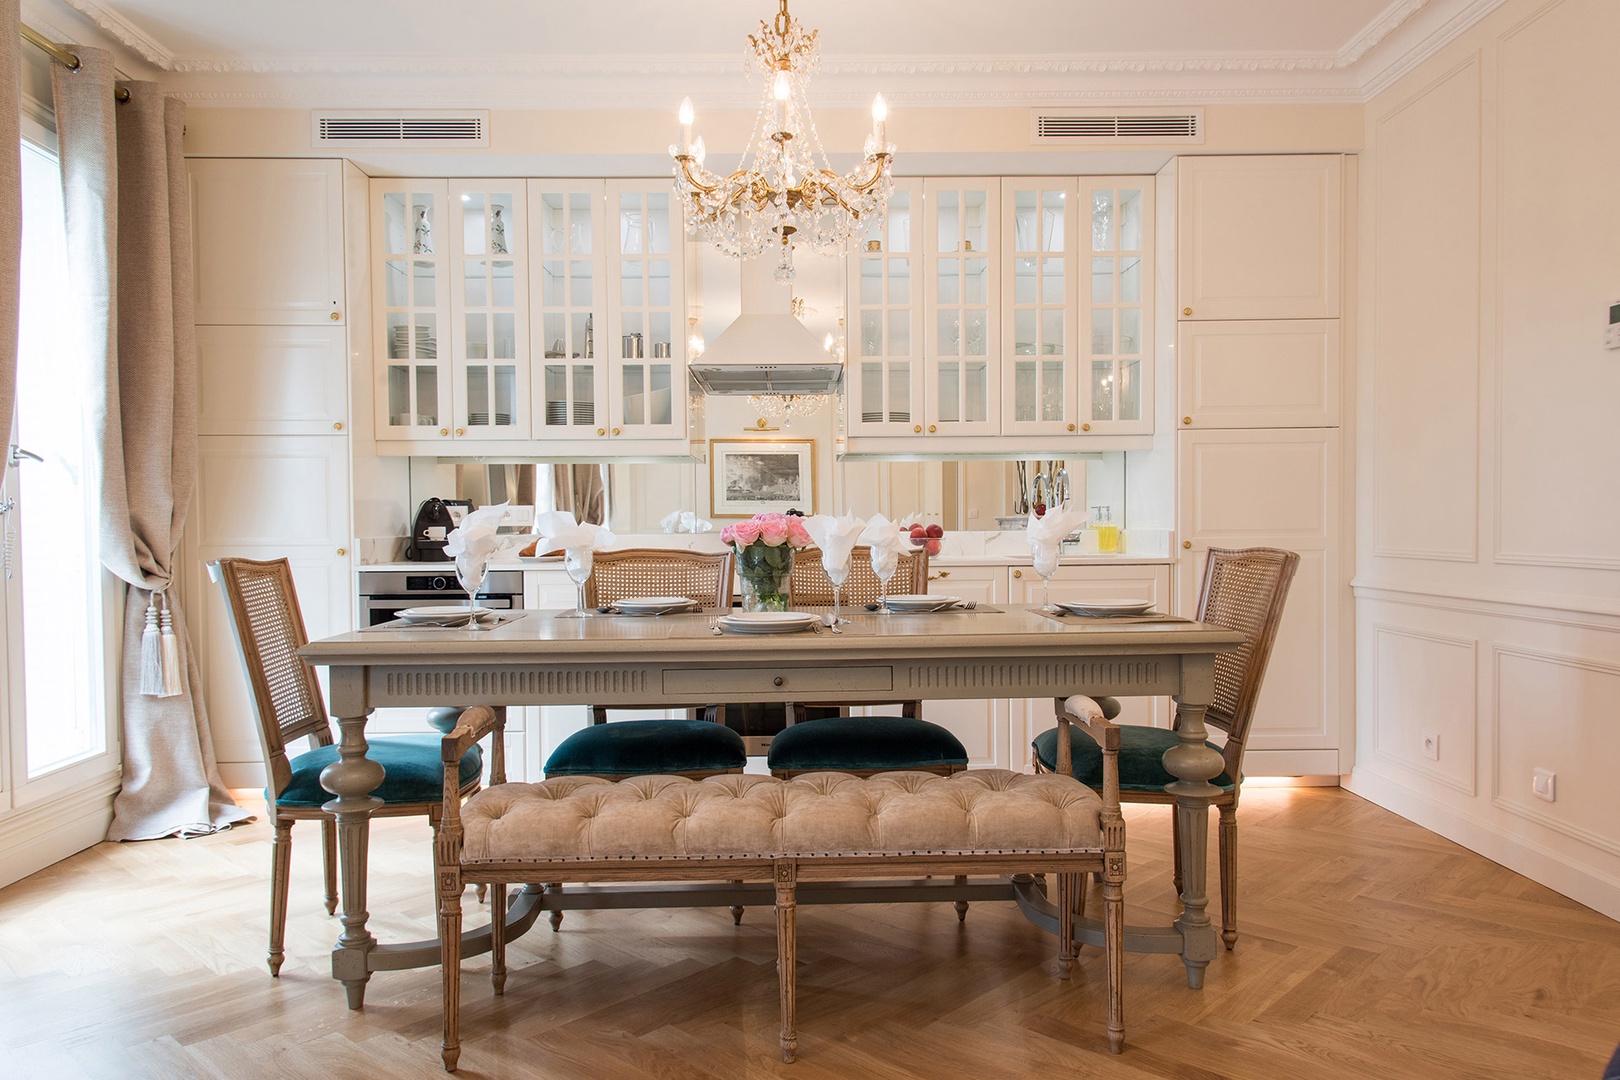 The large dining table comfortably seats eight guests.